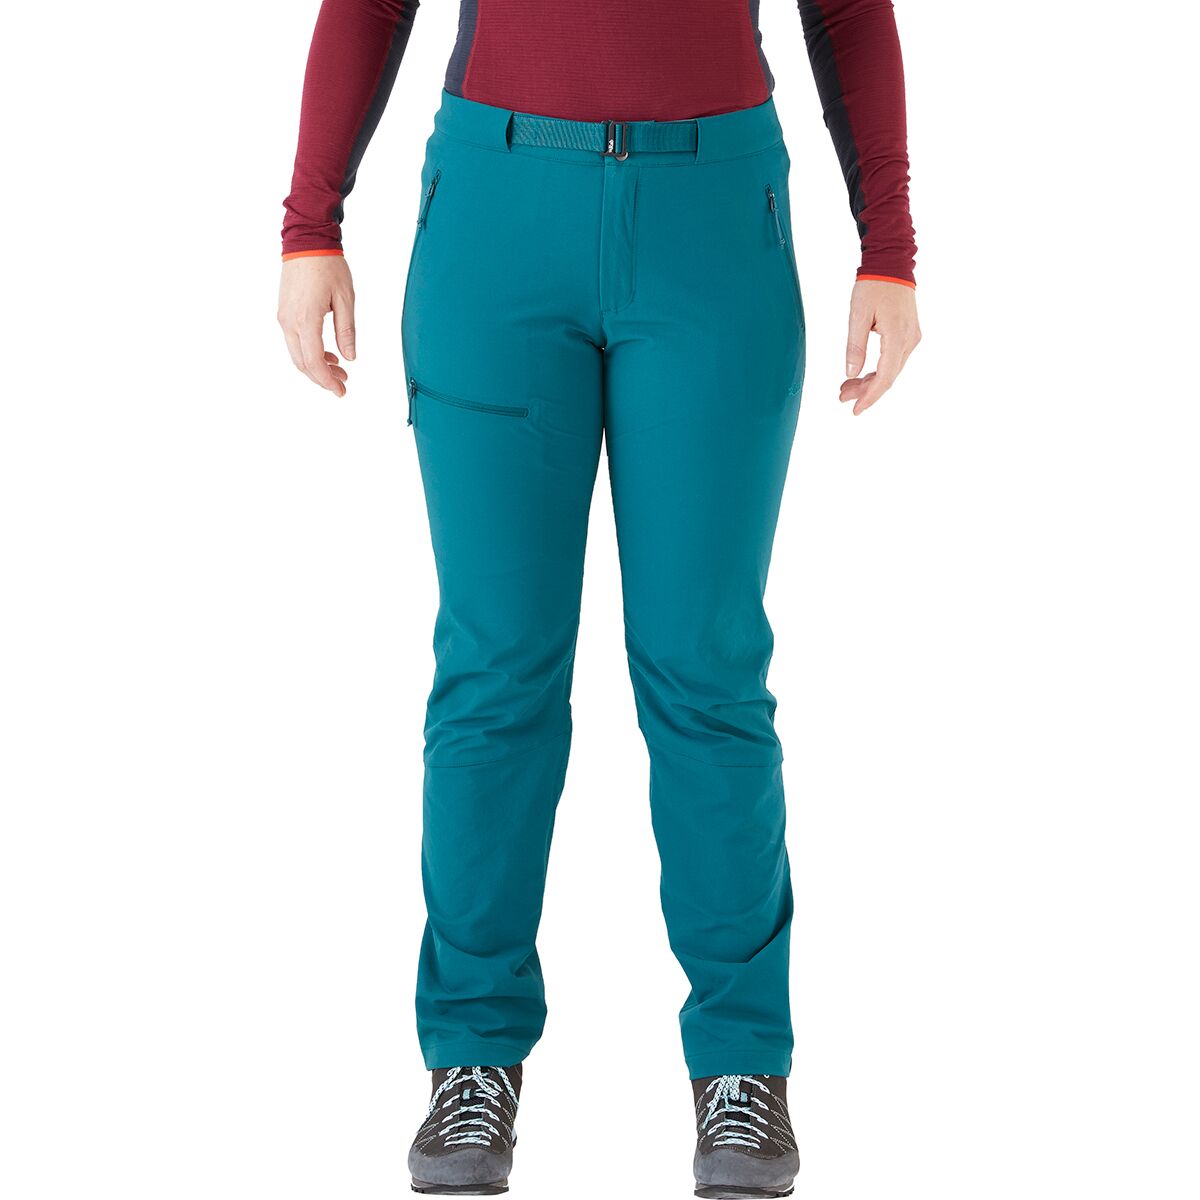 Rab Incline AS Pant - Women's